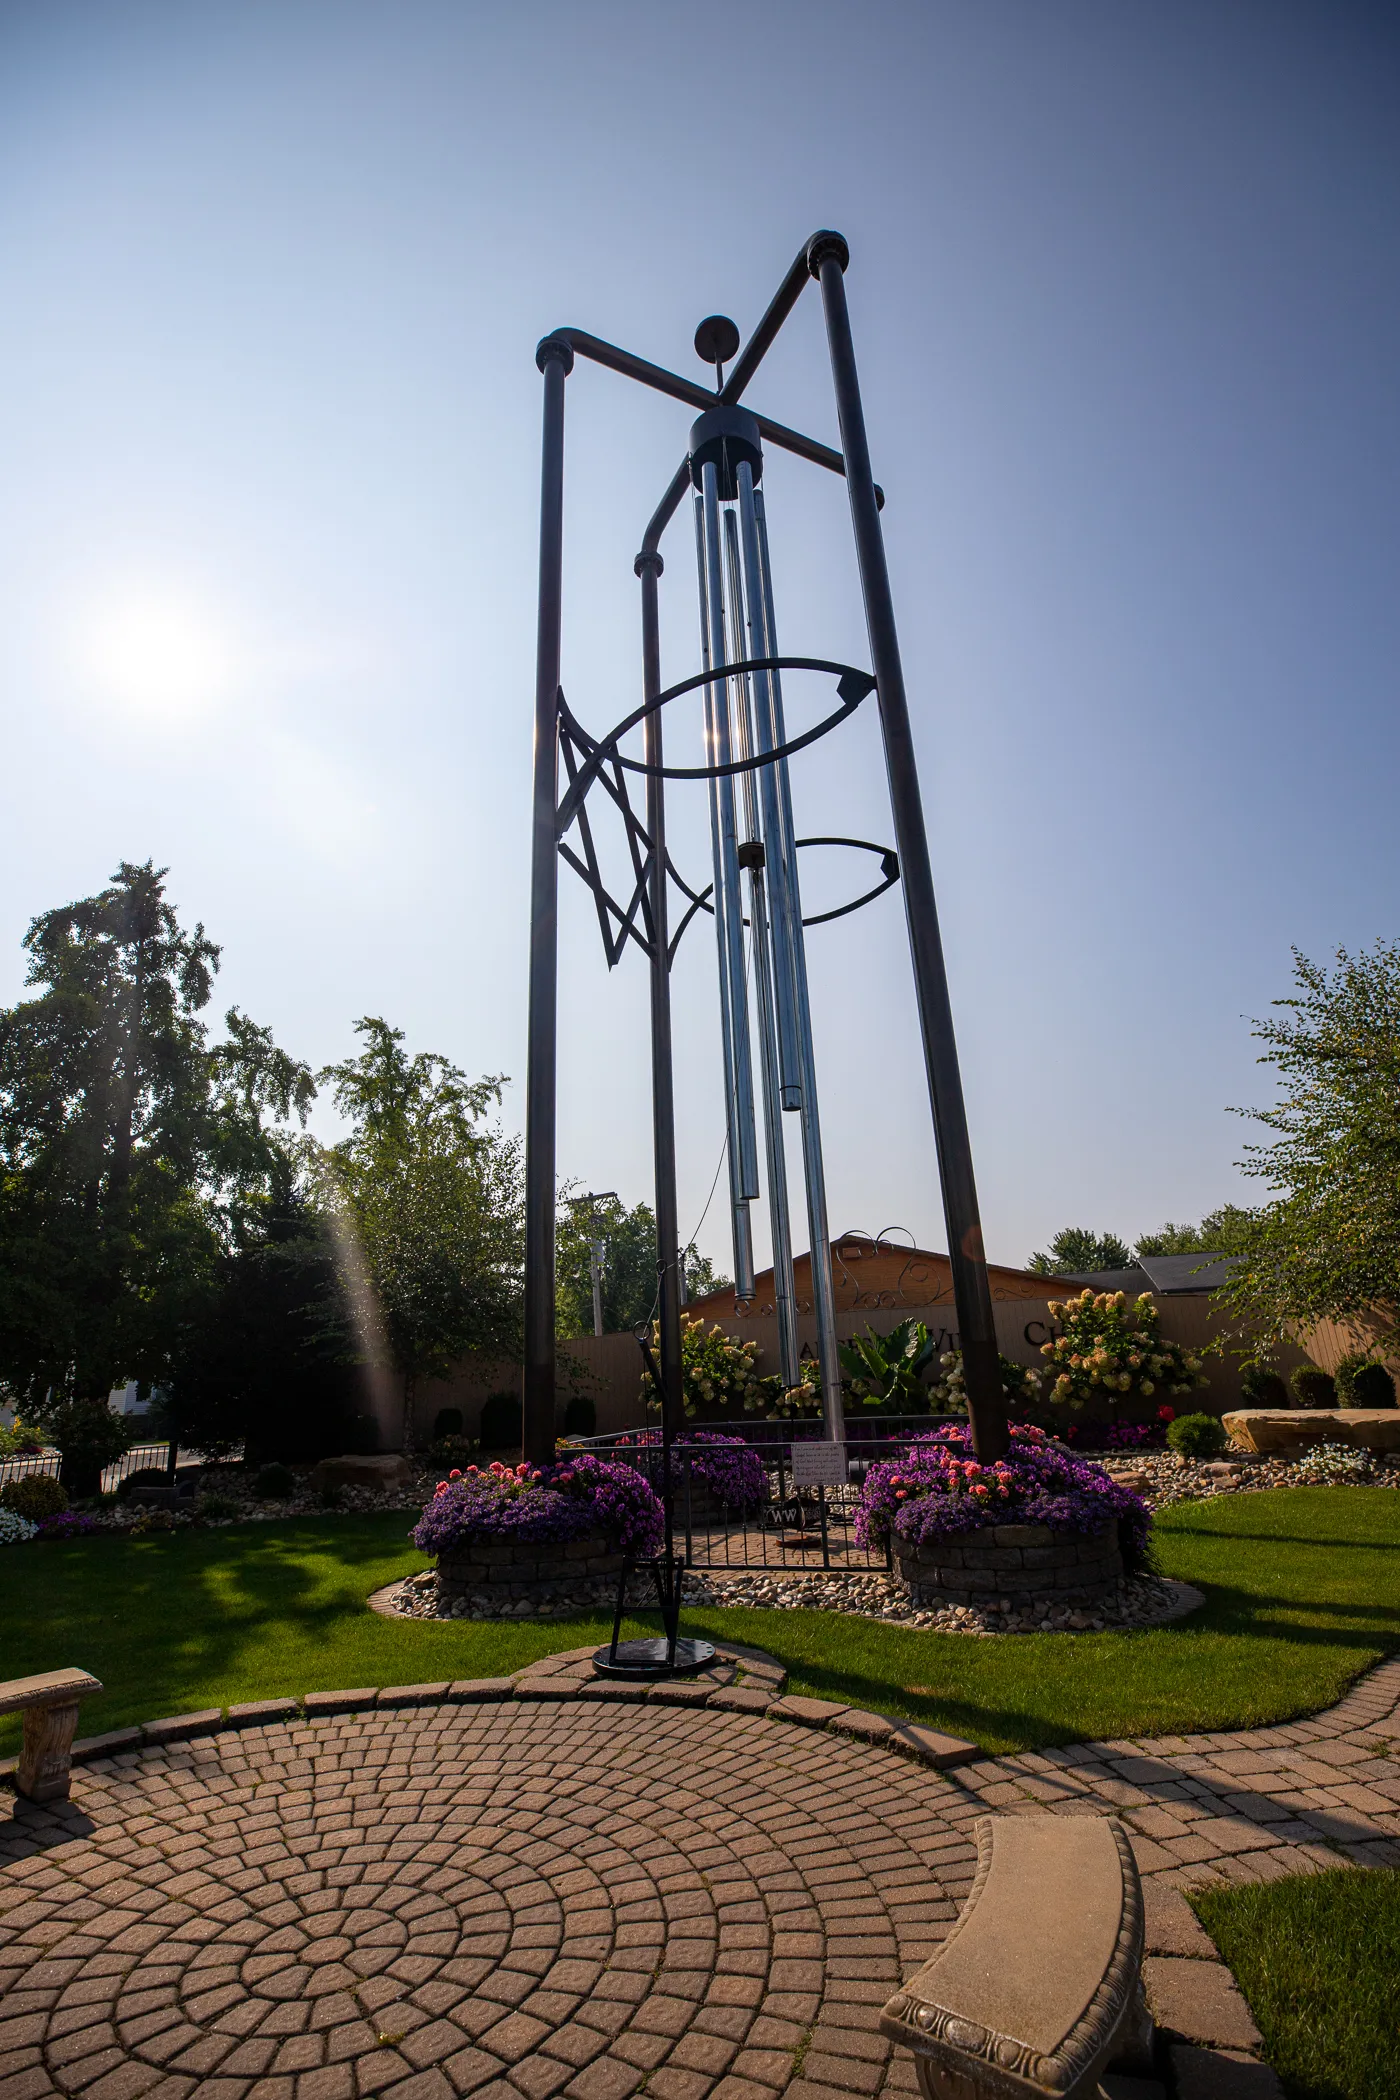 World’s Largest Wind Chime in Casey, Illinois Roadside Attraction